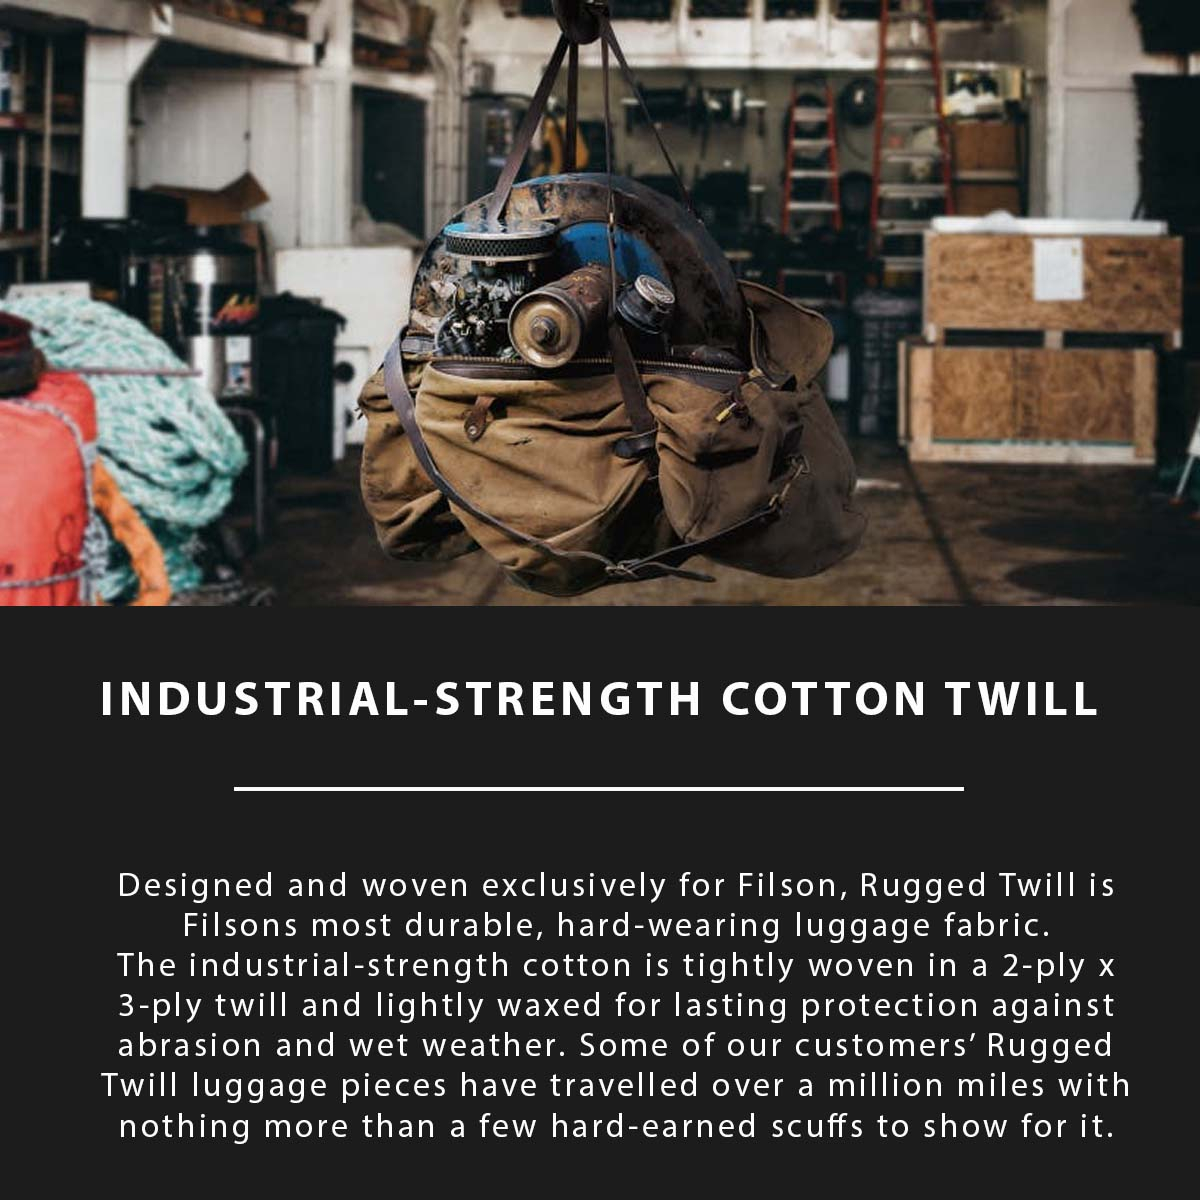 Filson Rugged Twill Duffle Bags, Rugged Twill is Filsons most durable, hard-wearing luggage fabric